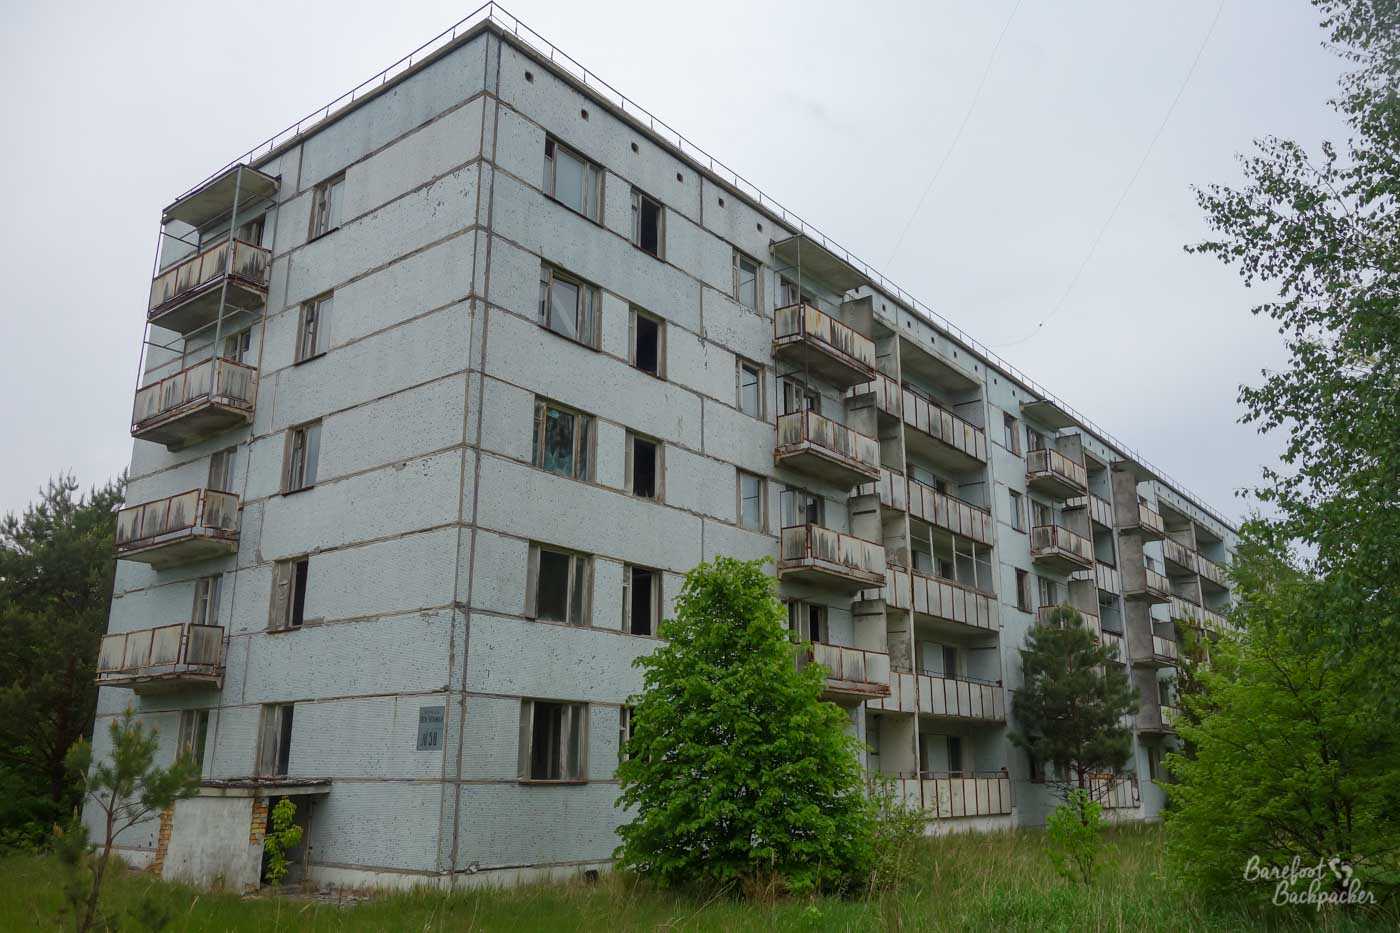 One of the many apartment blocks in Pripyat. This one is five storeys high, quite long, and with a very plain white exterior. Each flat has a small balcony. There are trees growing very close and slightly up it, but not through the walls, yet.